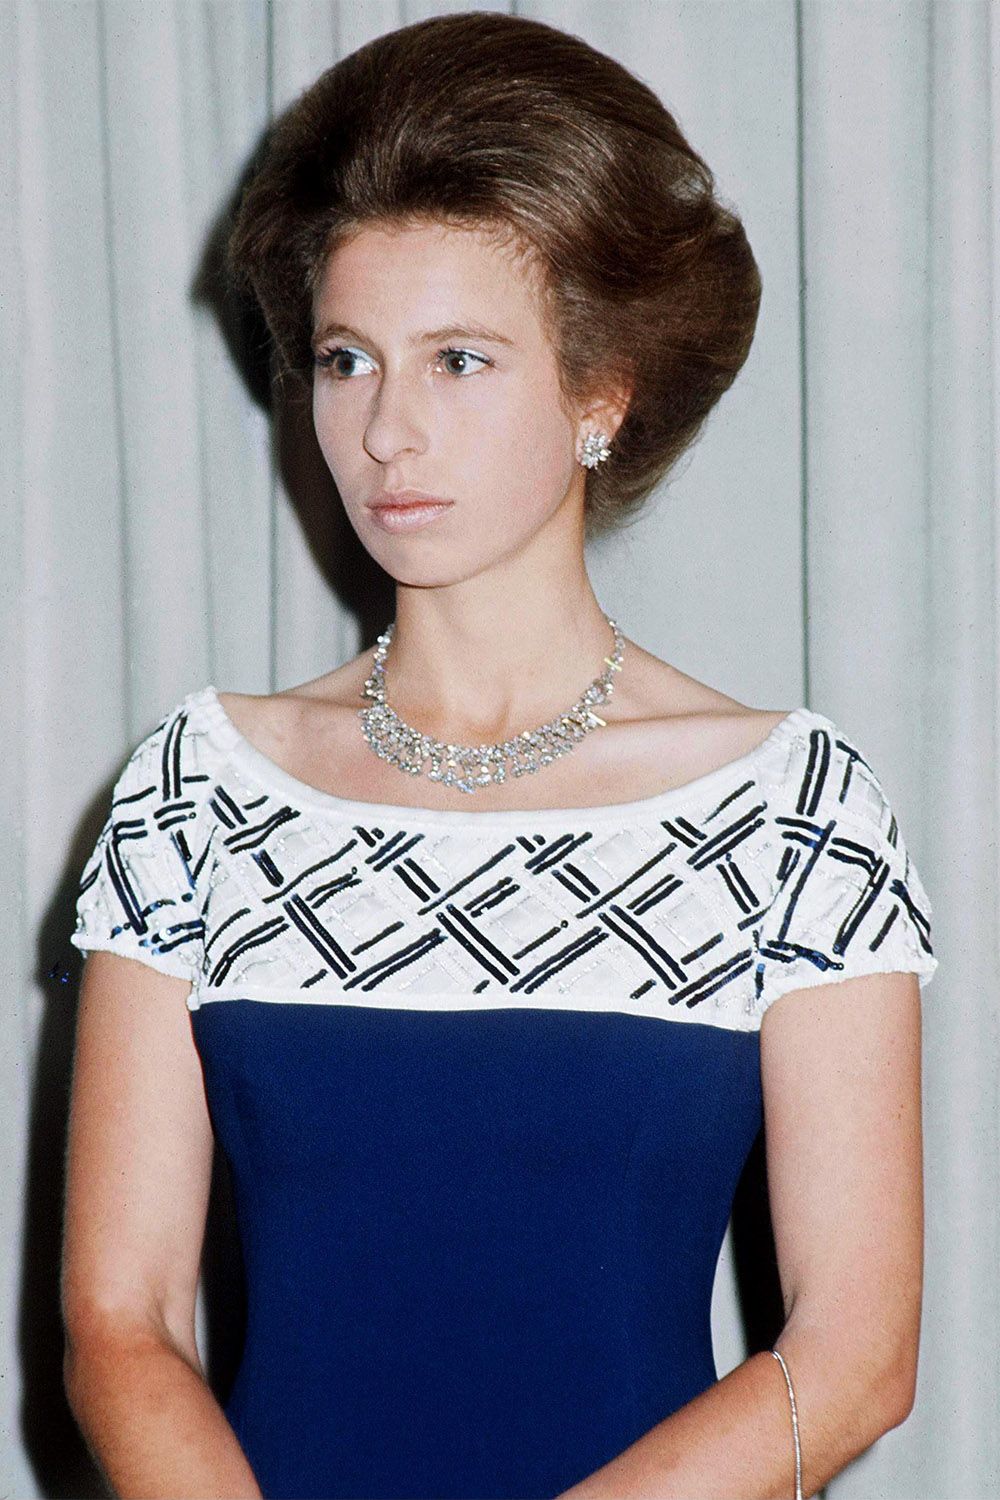 100 Best Royal Hairstyles Through The Years - A History of Royal, Queen and  Princess Hair Looks